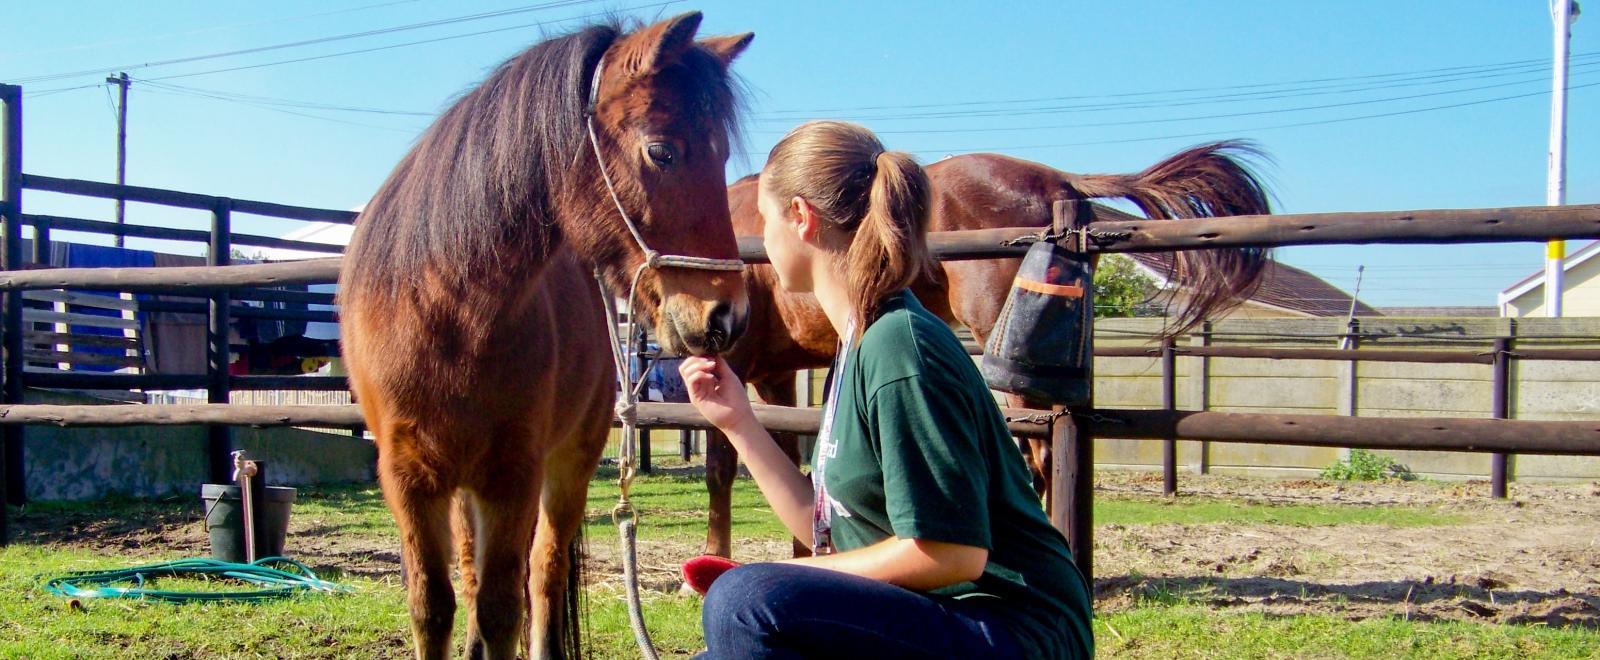 An intern works with a horse on one of our Animal Care internships abroad.